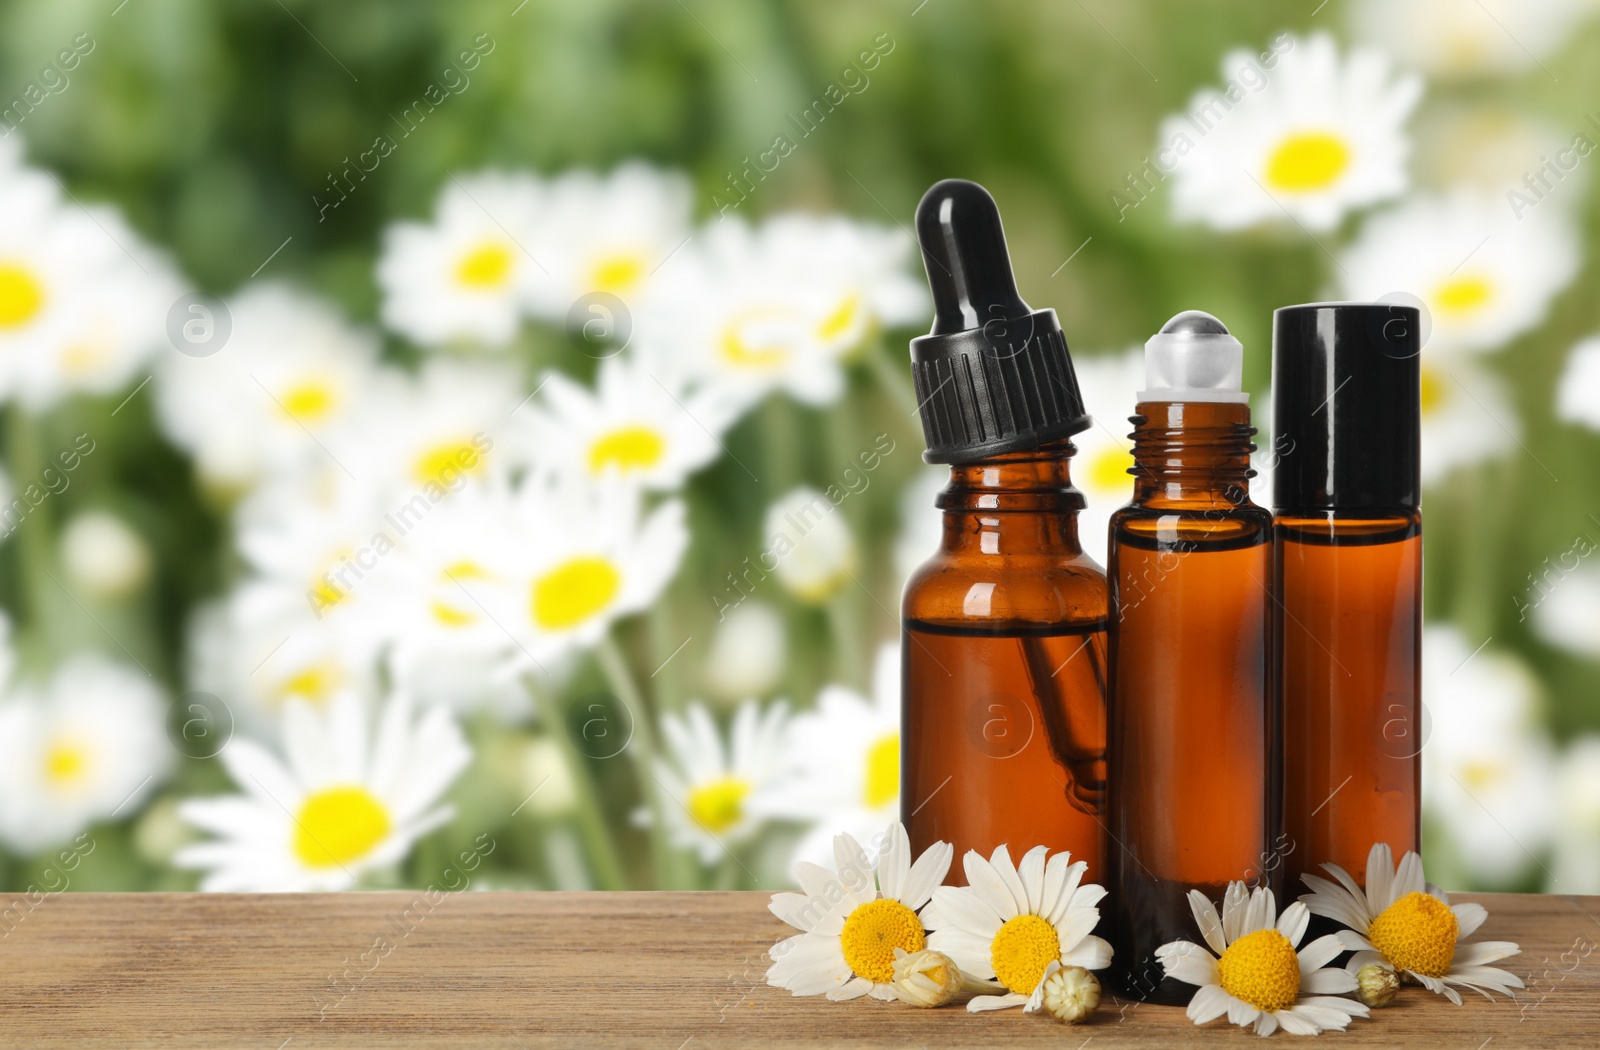 Image of Bottles of essential oil and chamomile flowers on wooden table against blurred background. Space for text